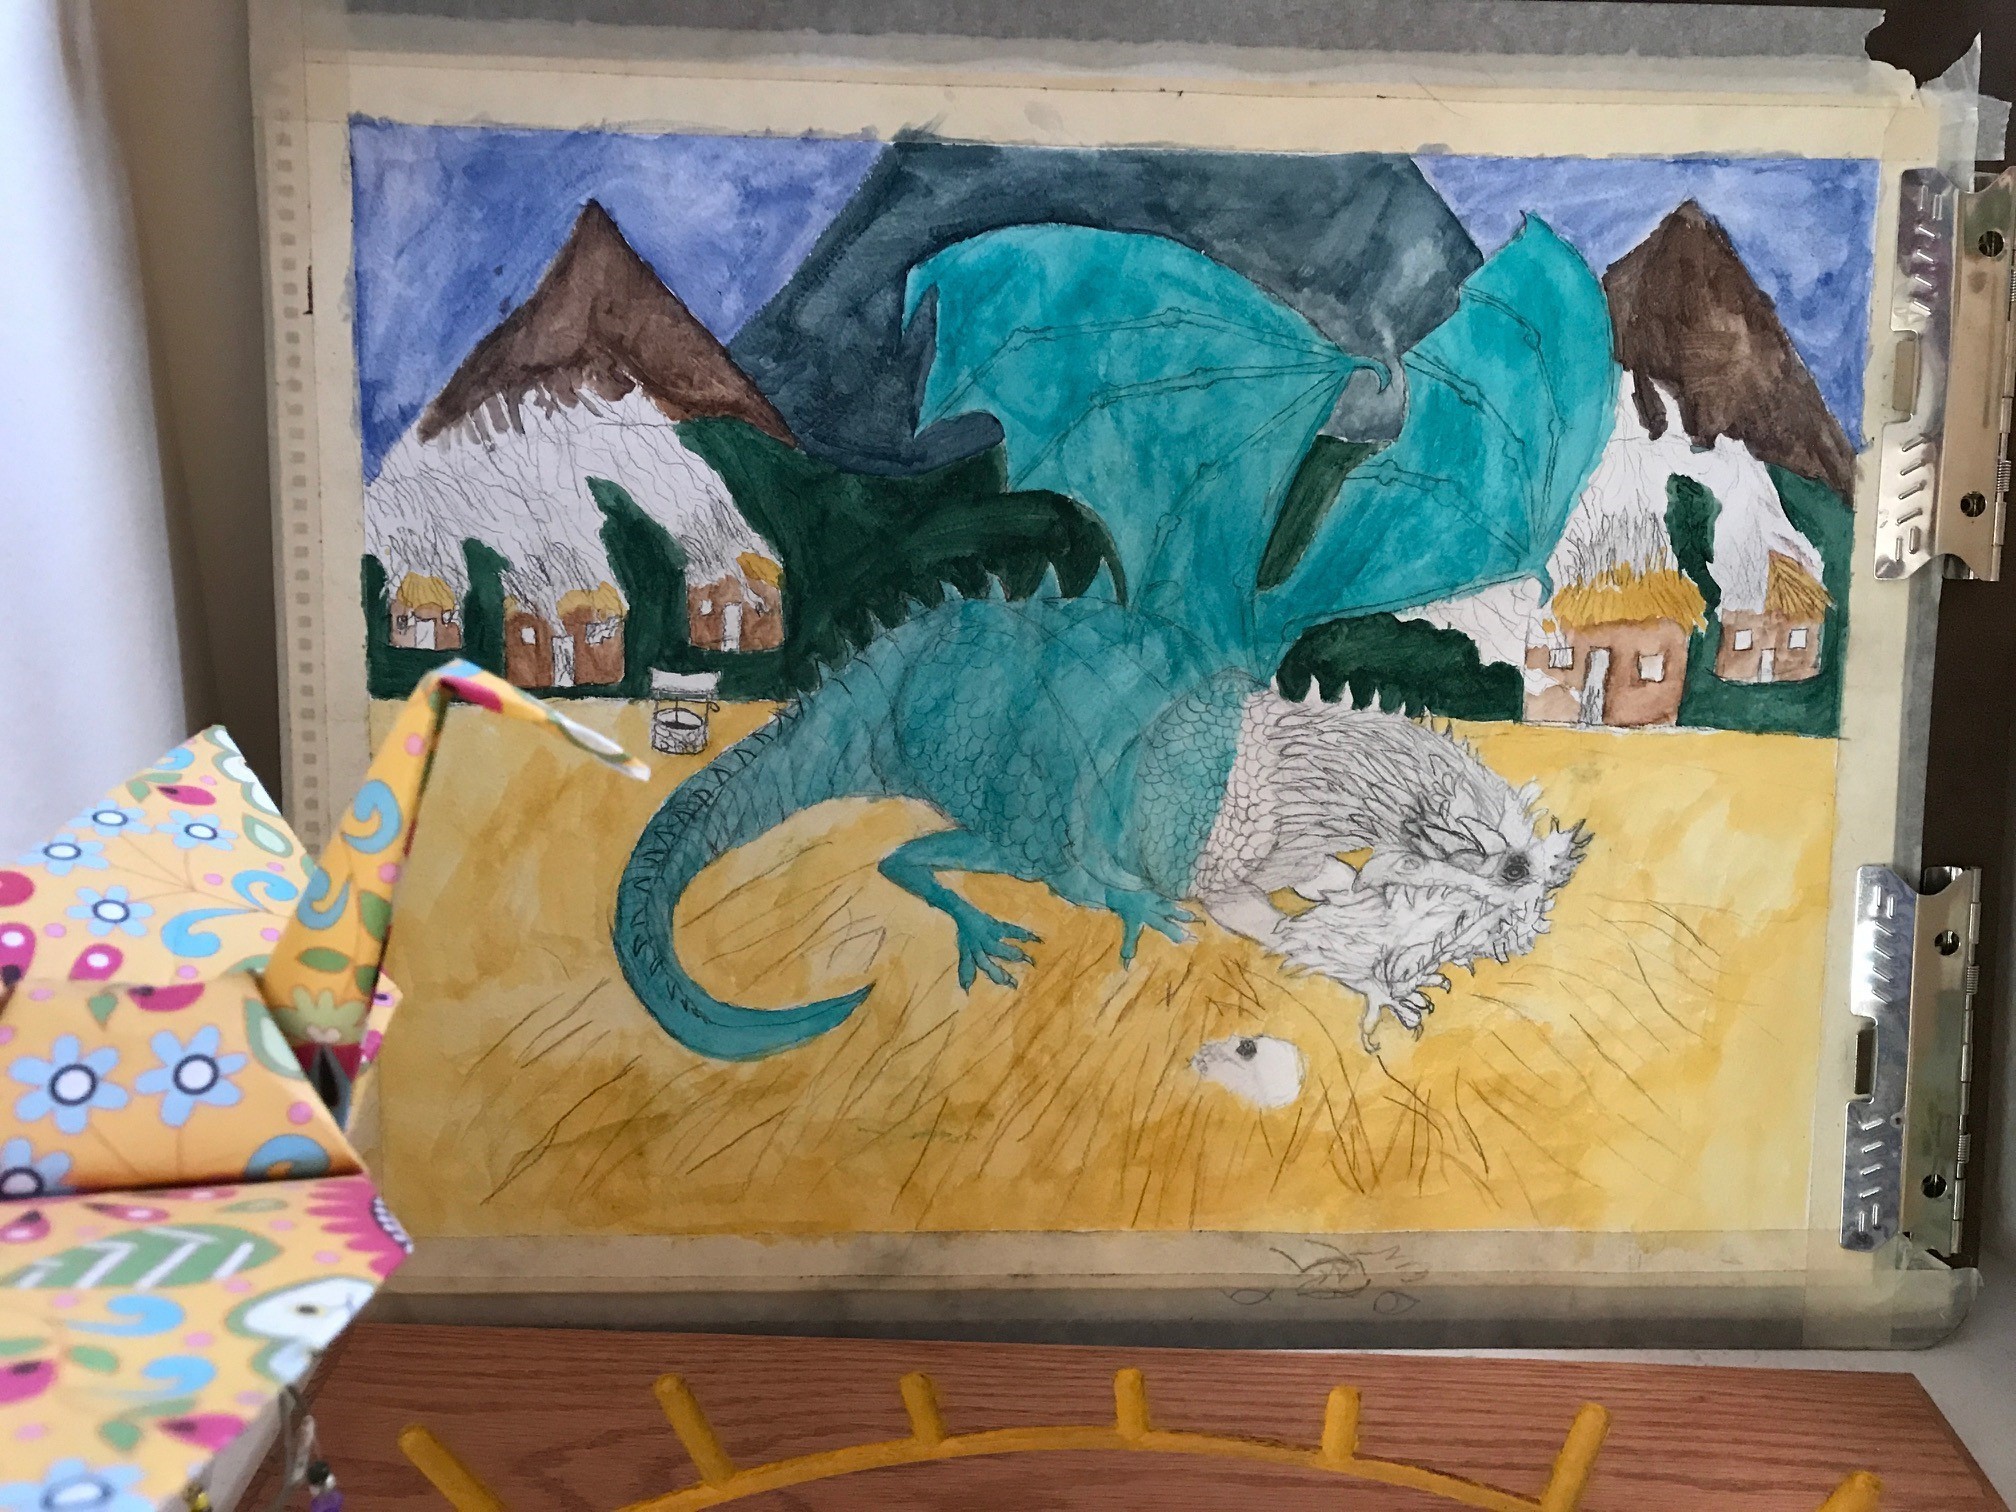 Joey's unfinished painting